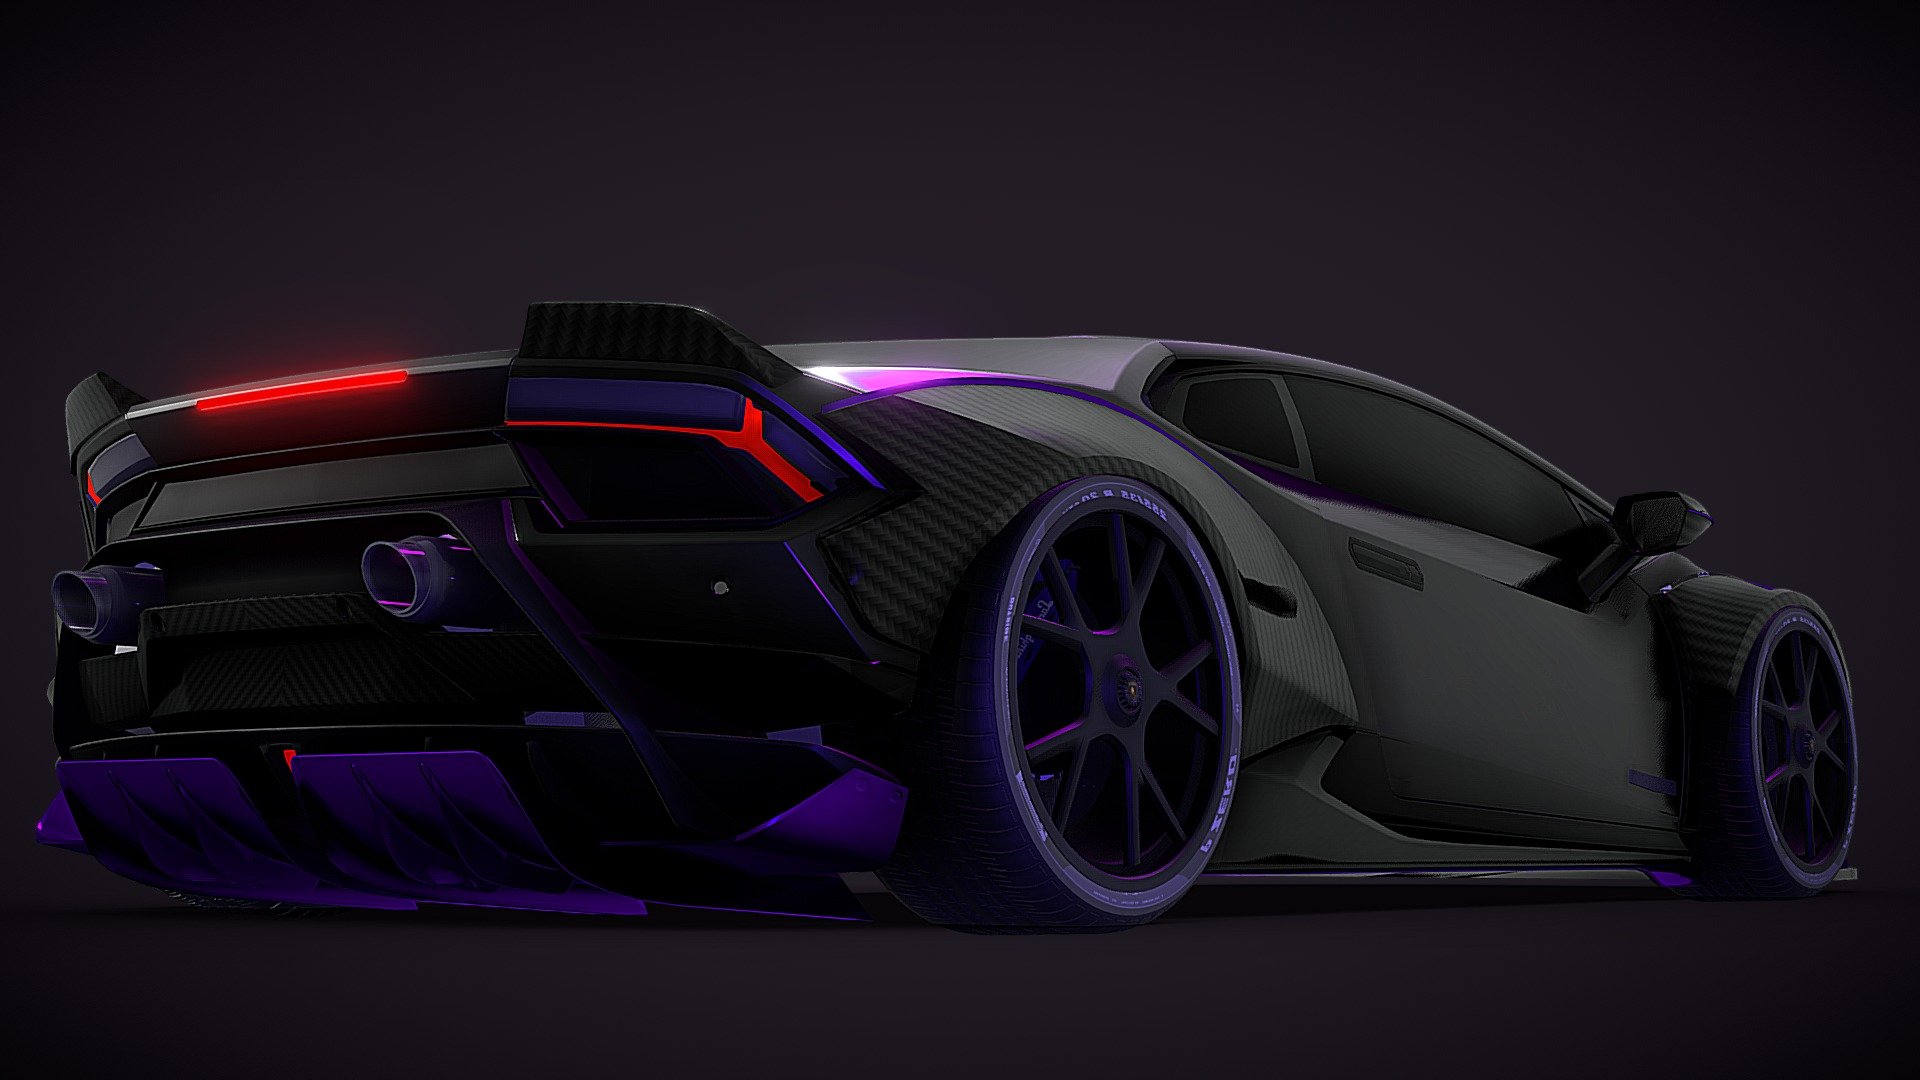 &ldquo;I have always wondered, if one day I own a Lamborghini Huracan and I have to modify it, what will it look like?

I already knew the basics: widened bodywork, twin-turbo propulsion, an imposing rear diffuser, elegant rims, and lots of carbon fiber!

So, I opened Blender software and started modeling. However, the result was not what I imagined. So I started again several times, looking for the right colors, the right rims, an aesthetic kit, and an impeccable result.

I wanted to give it a name. Since it was large, with side and rear wings, I named it the Huracan Falcon, in reference to the powerful and majestic bird, which is also the emblem of my country&hellip;